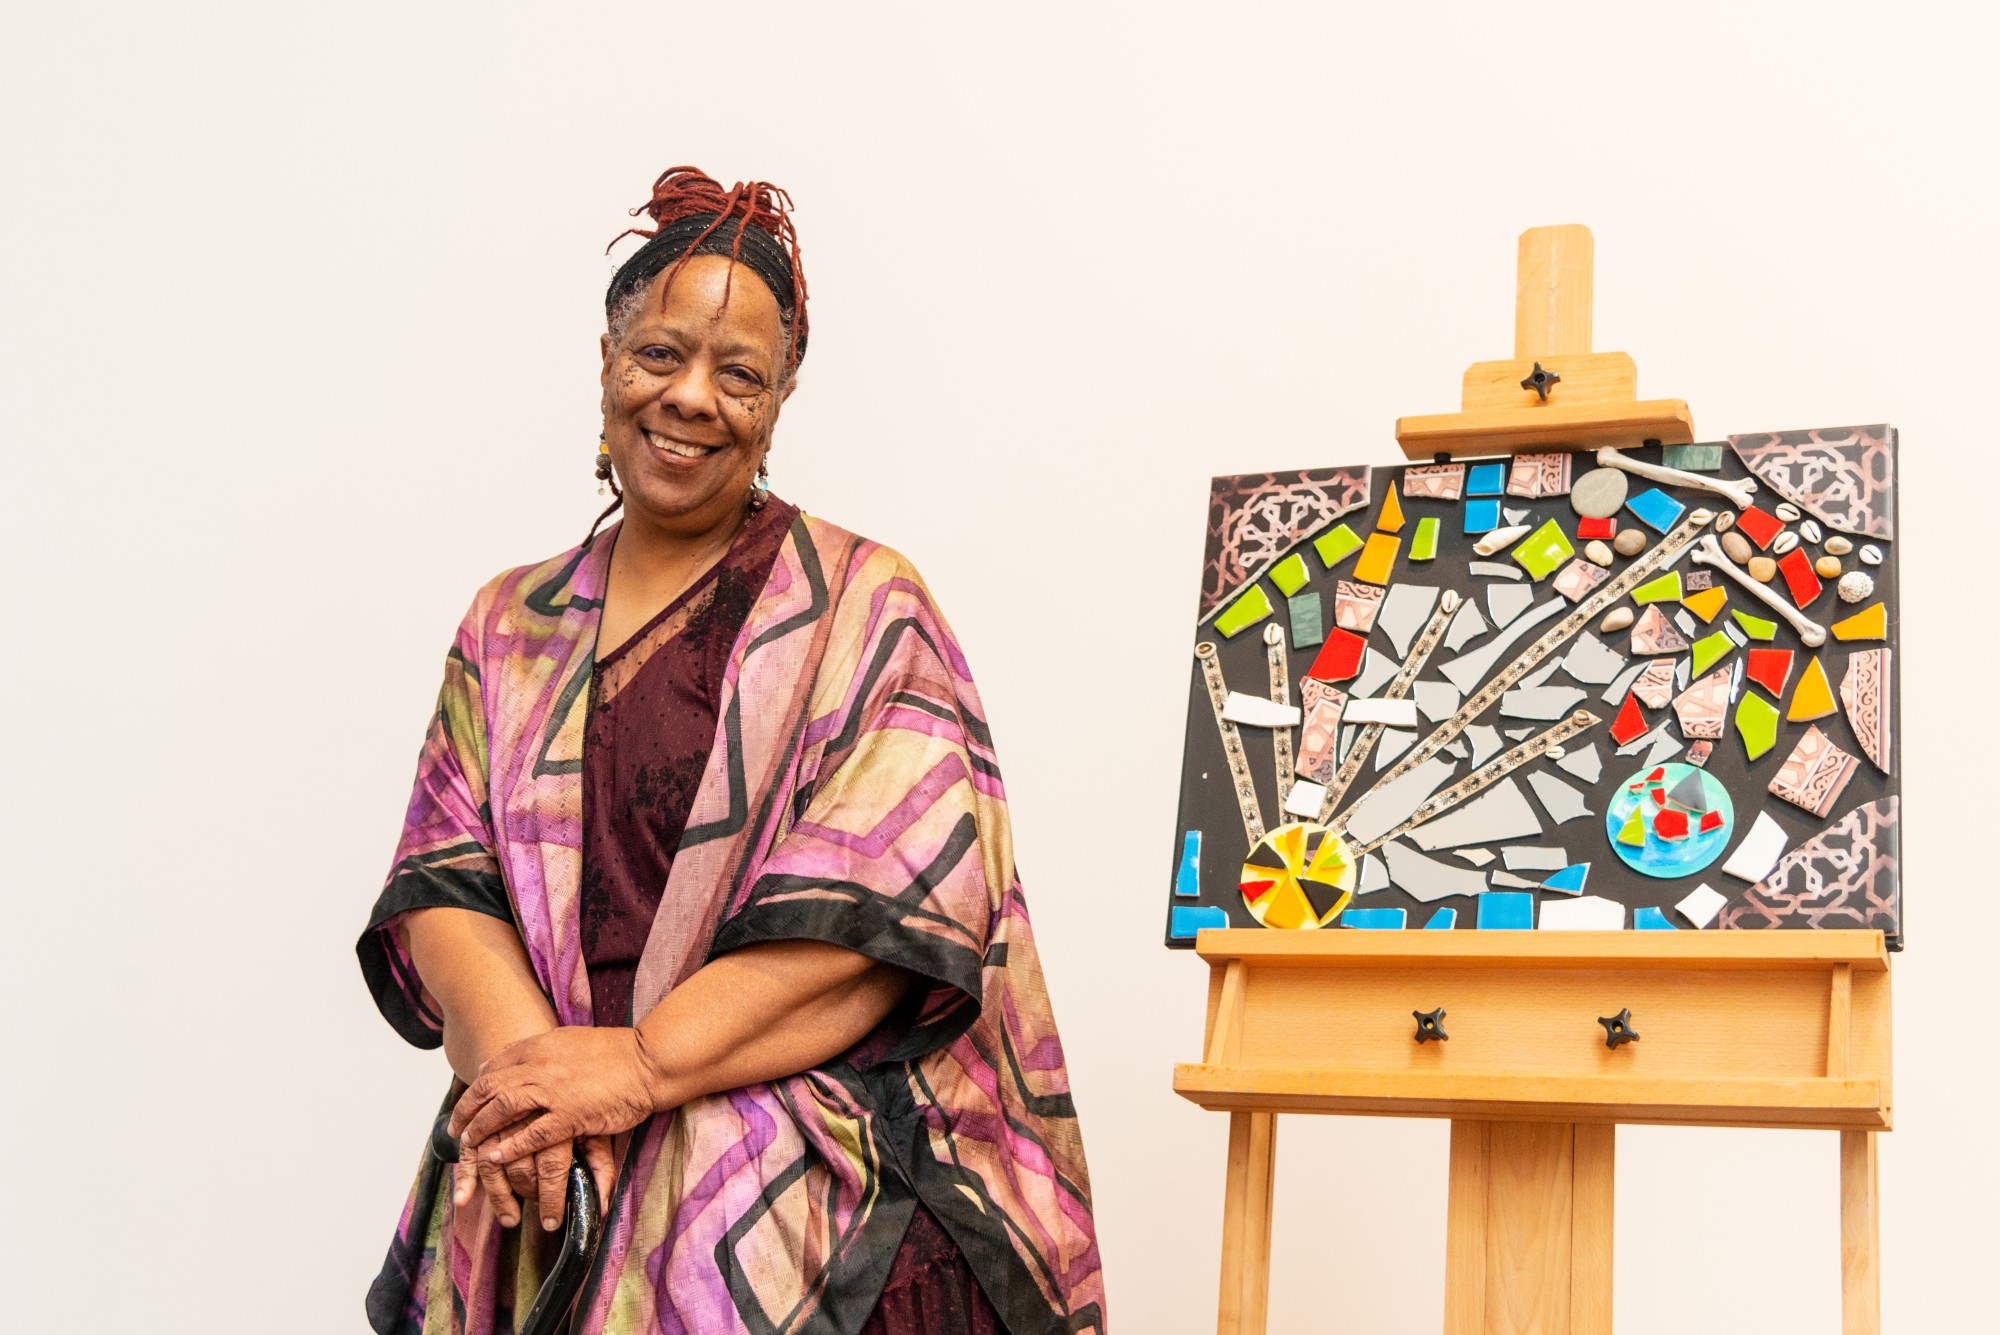 Exhibit Curator Amoke Kubat poses for a portrait in the Weisman Art Museum on Saturday, Feb. 15. Yo Mama’s House, an artist, activist and healer cooperative, is celebrating Black History Month and Women’s History Month with this pop-up display. (Emily Urfer / Minnesota Daily)